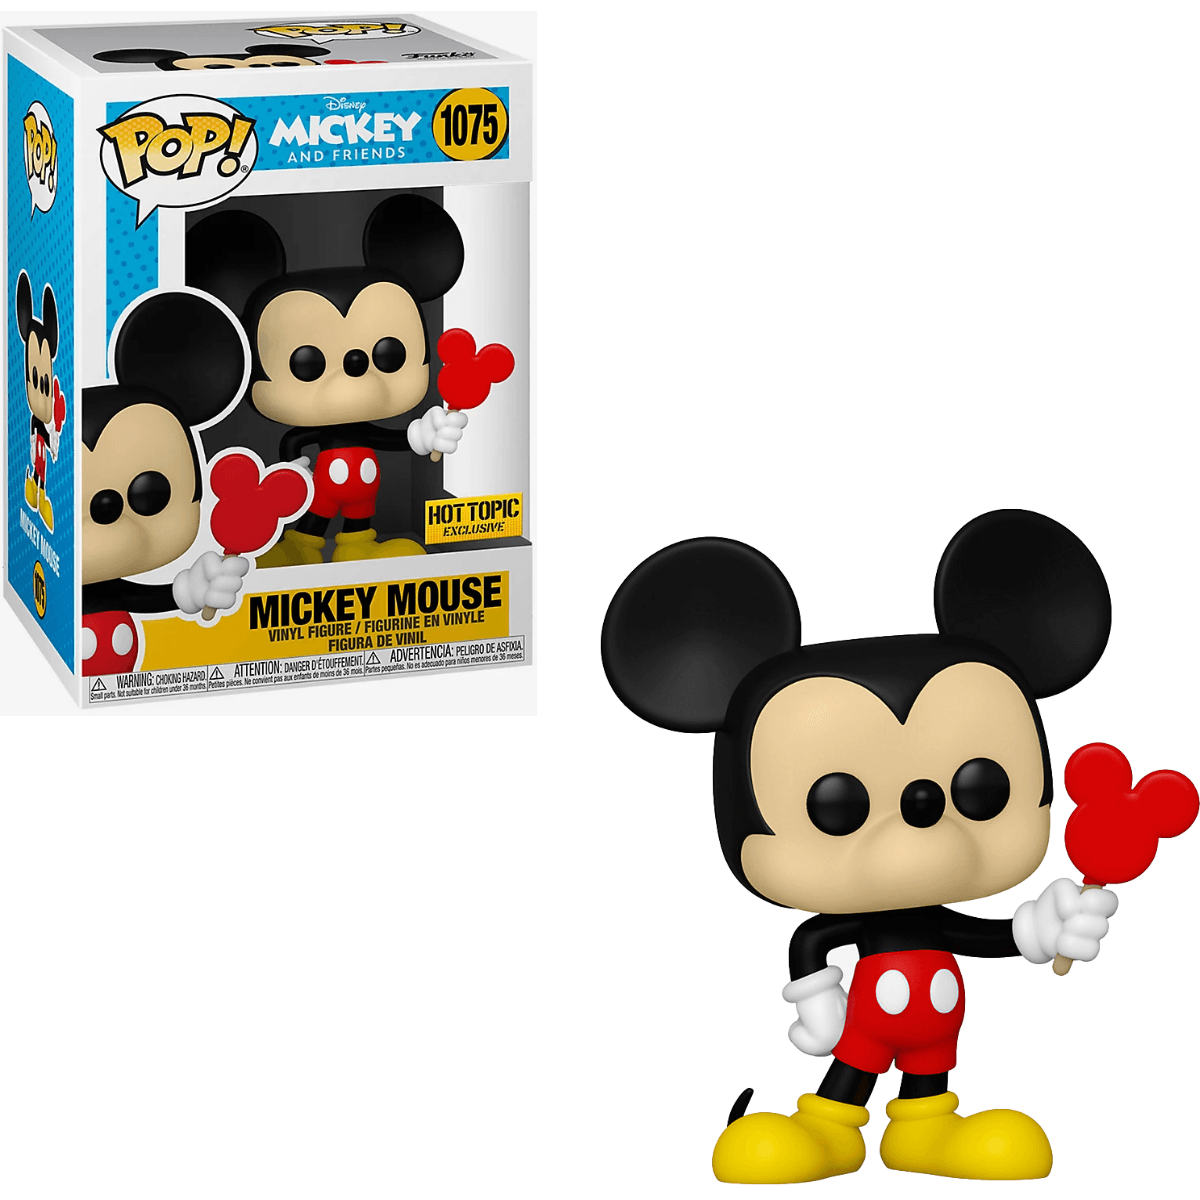 Pop! Disney - Mickey And Friends - Mickey Mouse - #1075 - Hot Topic EXCLUSIVE - Hobby Champion Inc